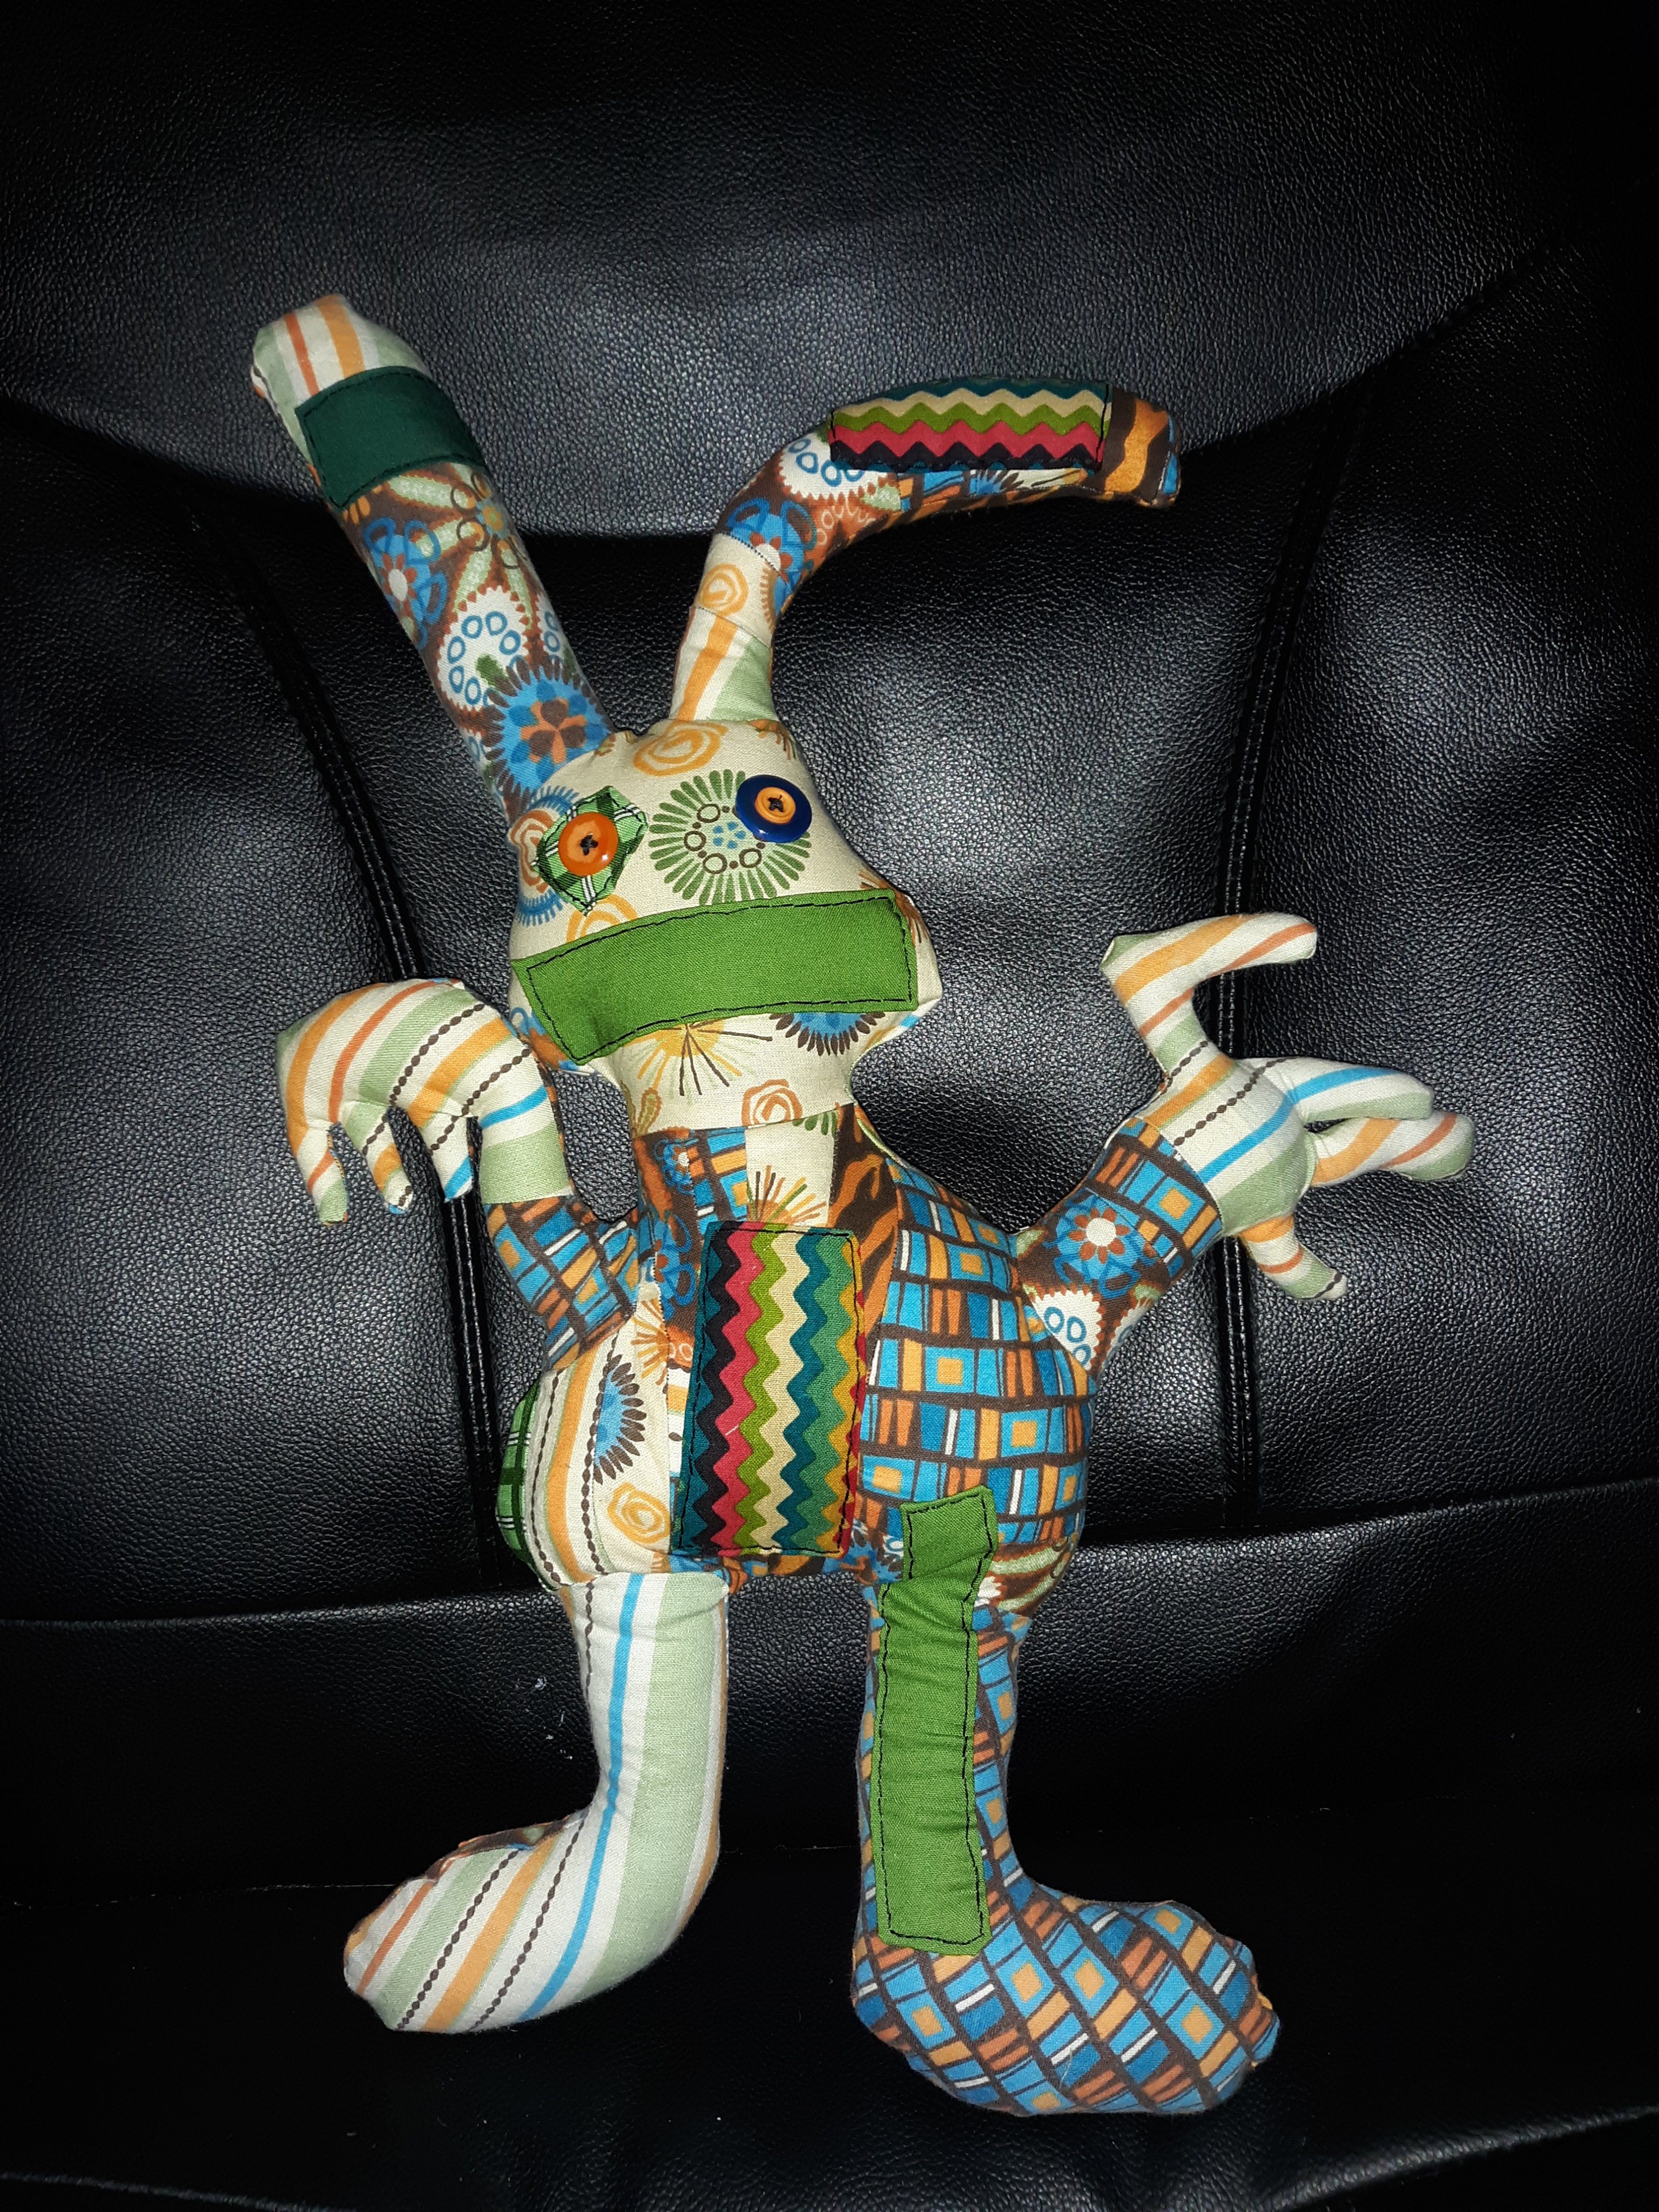 A patchwork doll that looks somewhat like a rabbit. It has two long ears sticking out of a head that has two orange and blue button eyes. There is a green mouth sewn onto the face. The body is somewhat triangular and has two arms sticking out with odd shaped hands. The doll also has two legs with rounded feet. The doll consists of different patterns like chevron, tiger, stripes, abstract floral, solid greens, and some rectangles.